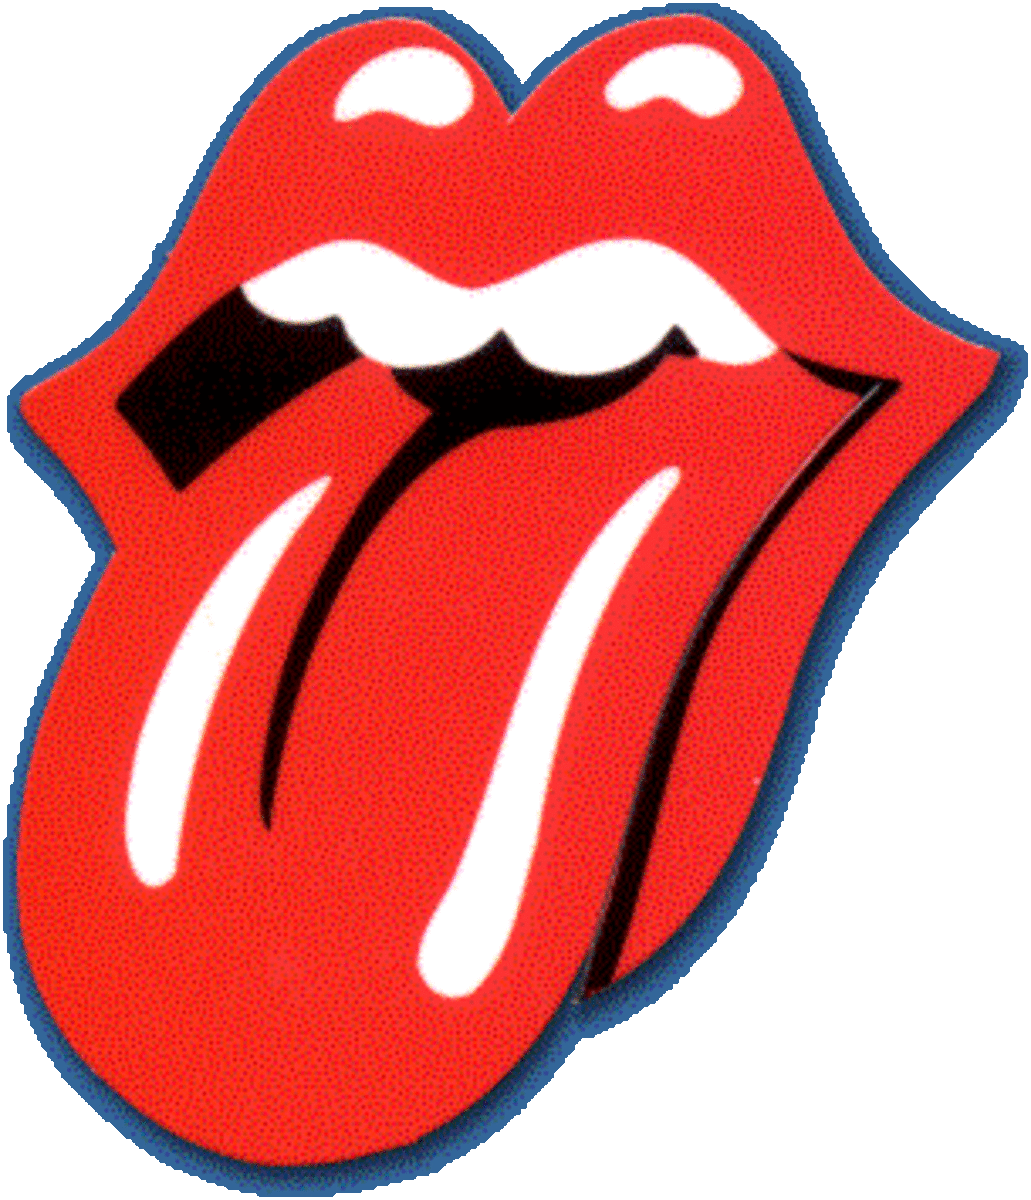 The Rolling Stones - The Greatest Rock & Roll Band of All Time